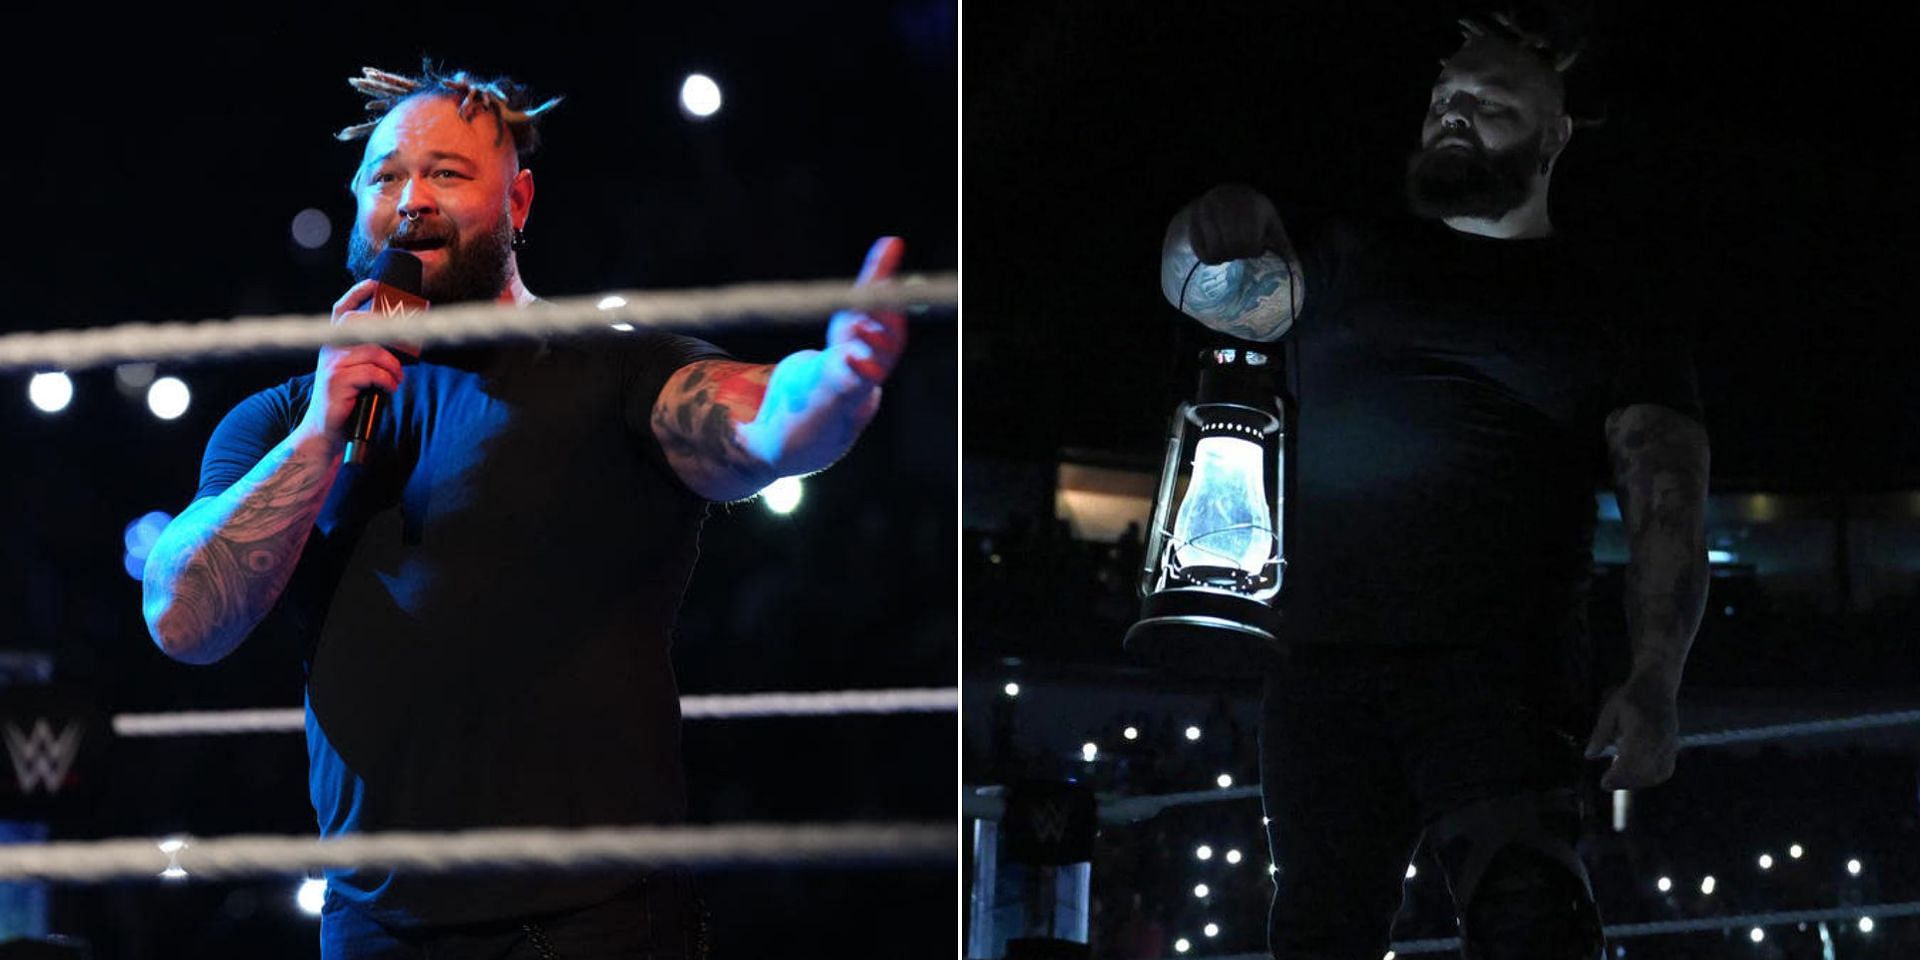 Bray Wyatt was part of the SmackDown brand